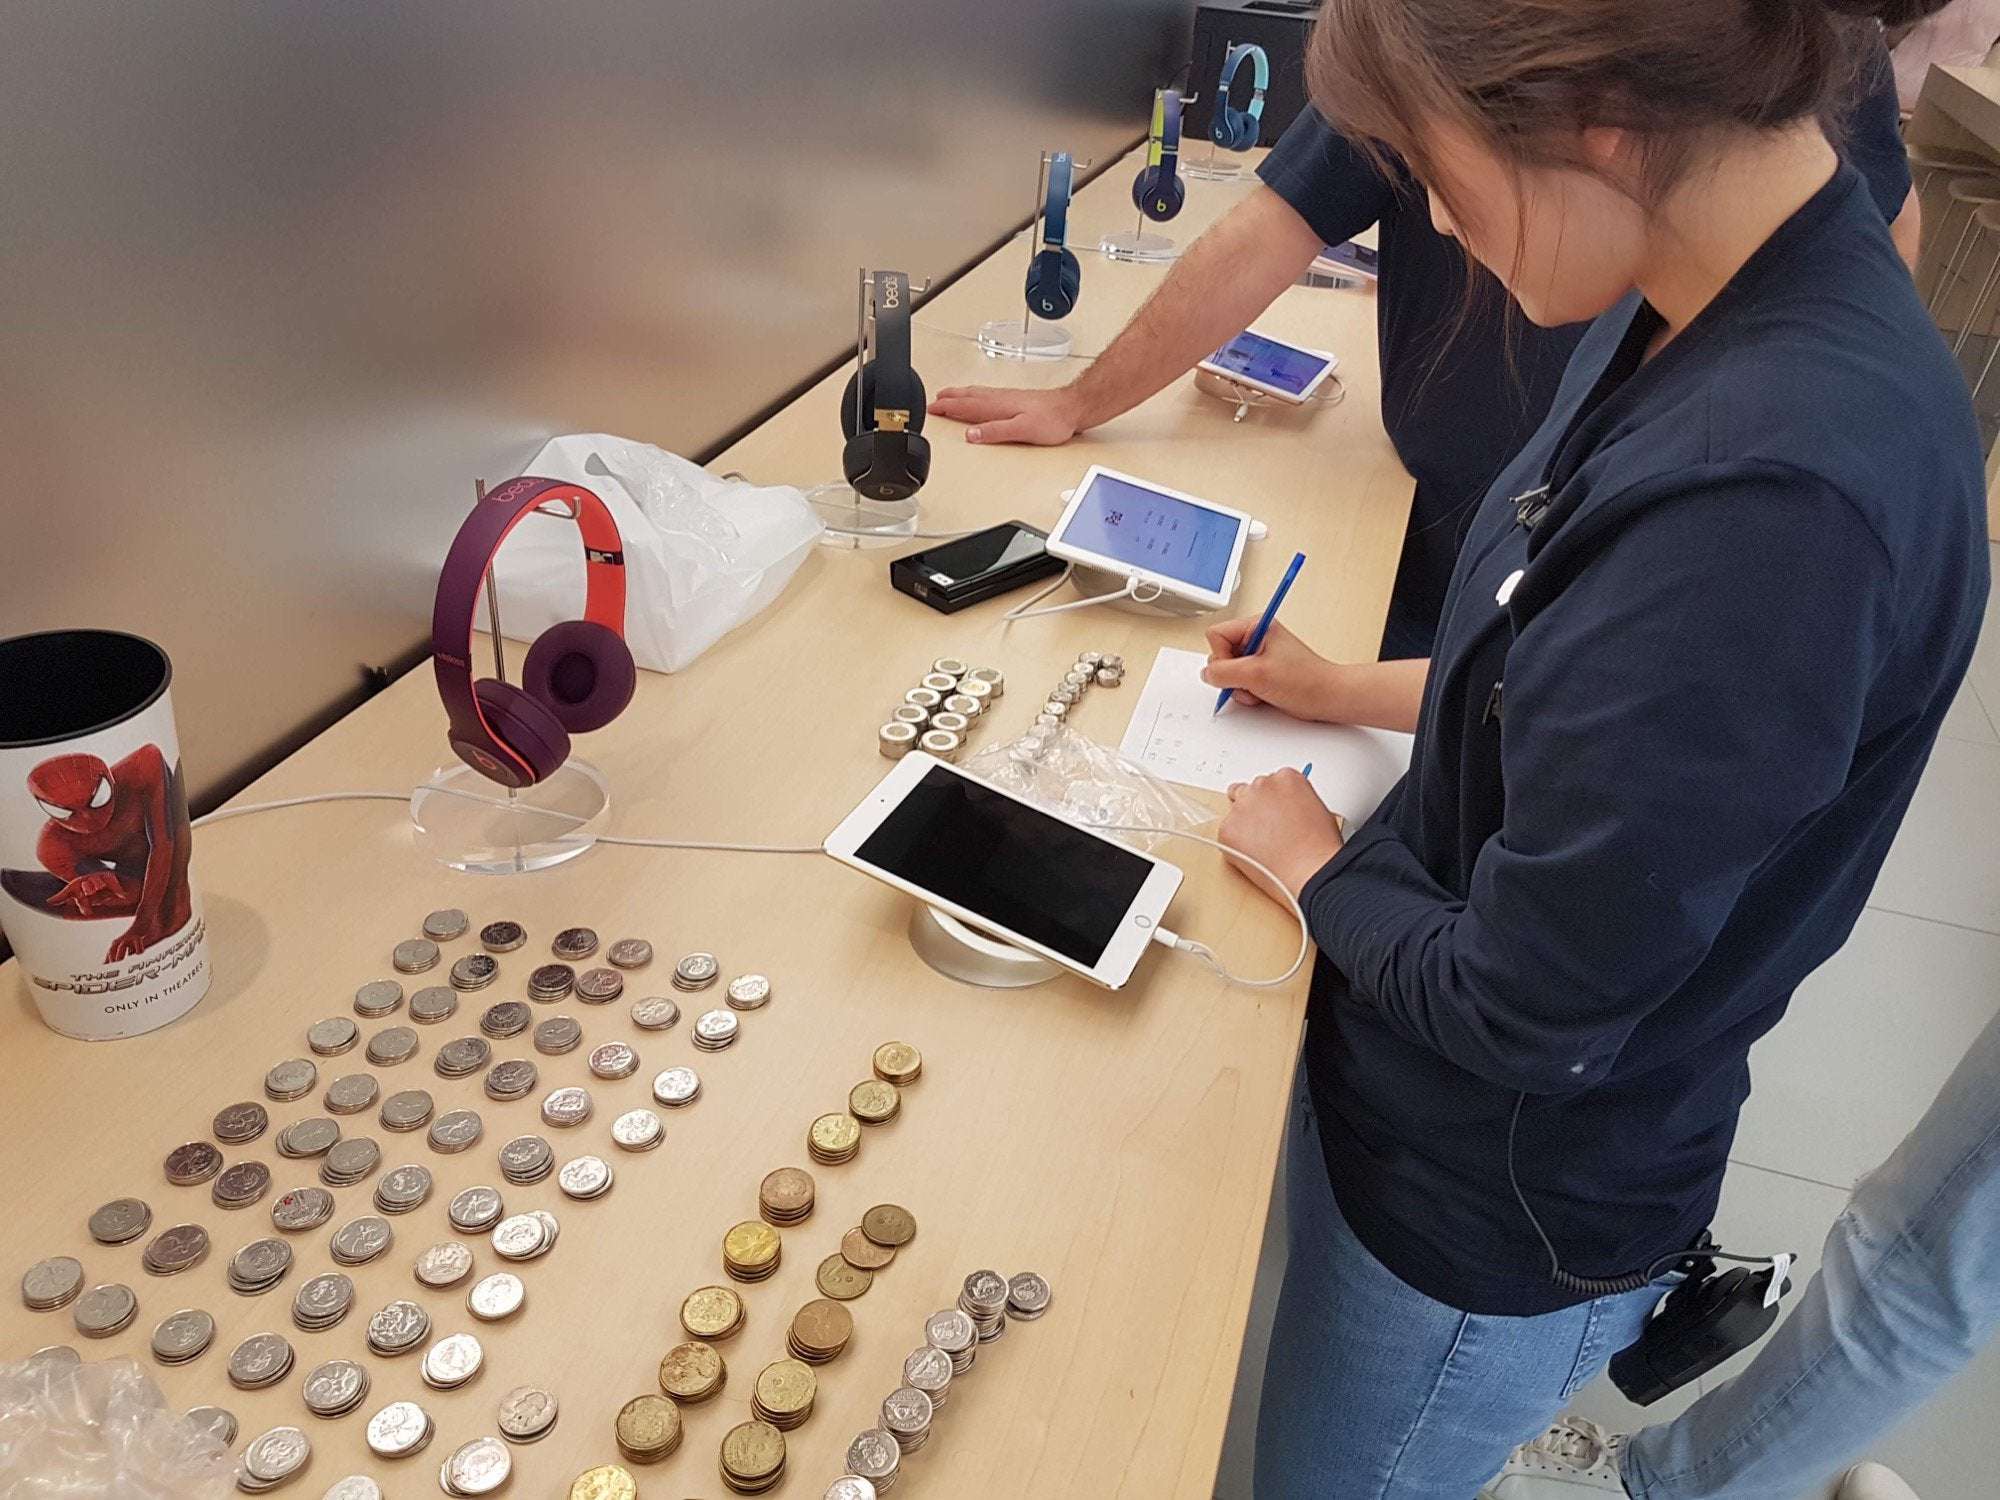 image showing Buying an iPad in the Apple store with hundreds of dollars in coins